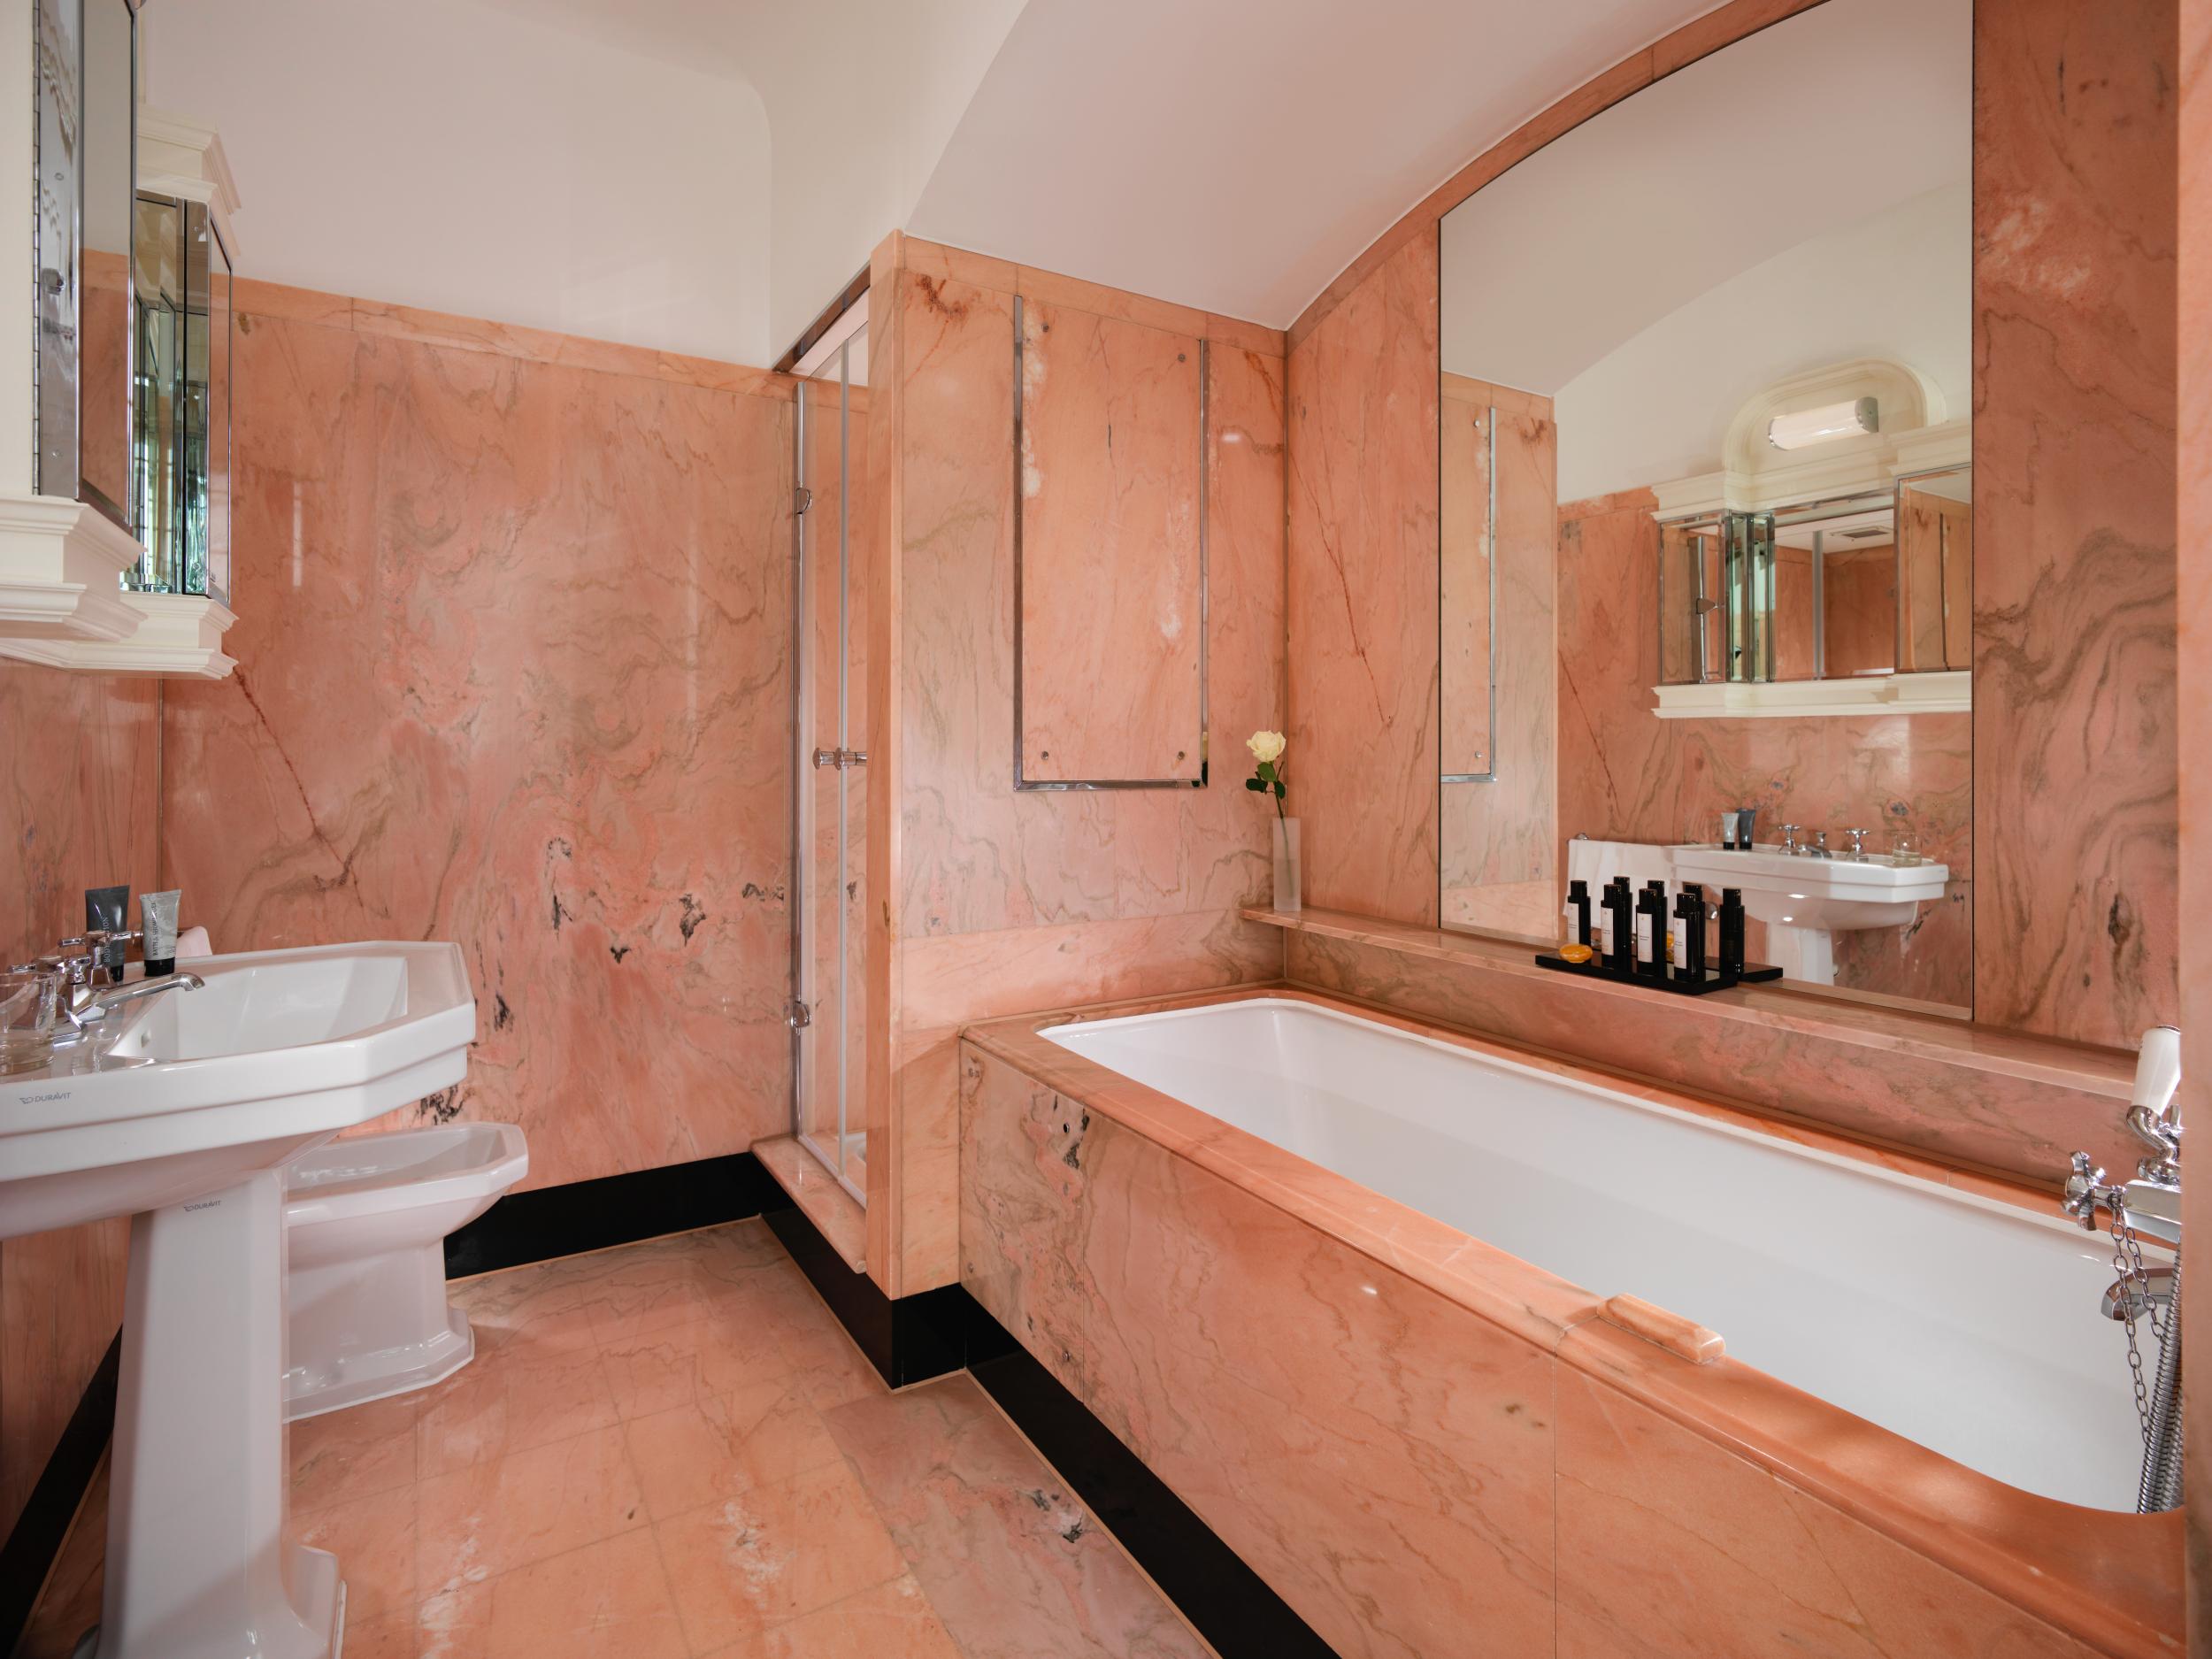 Elizabeth Taylor ordered the pink bathroom in the Harlequin Penthouse